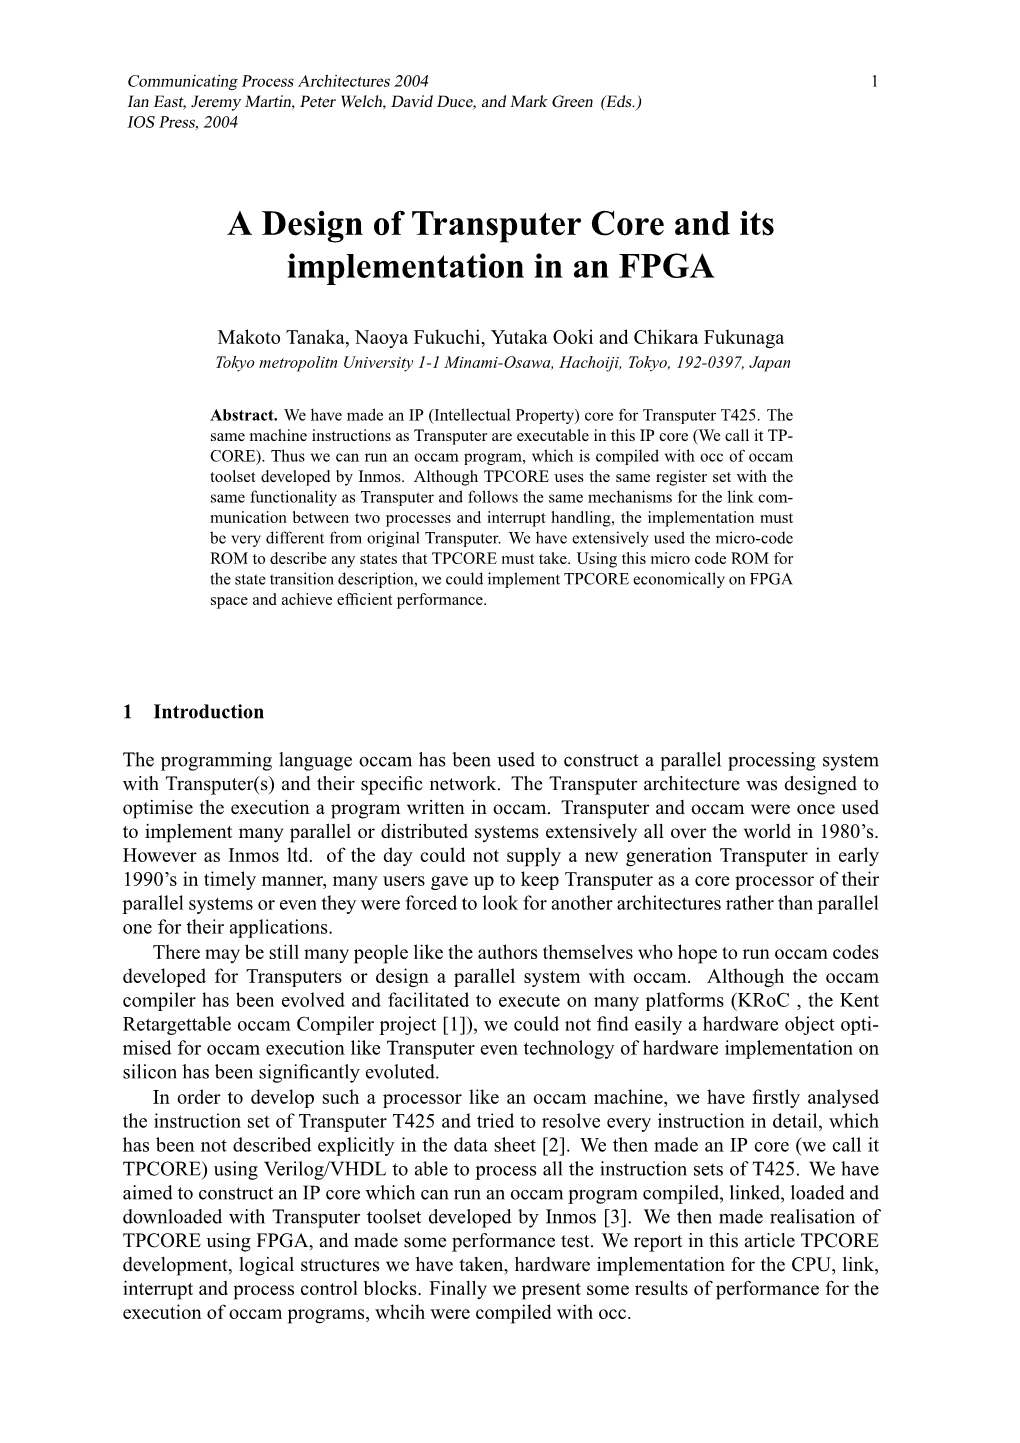 A Design of Transputer Core and Its Implementation in an FPGA